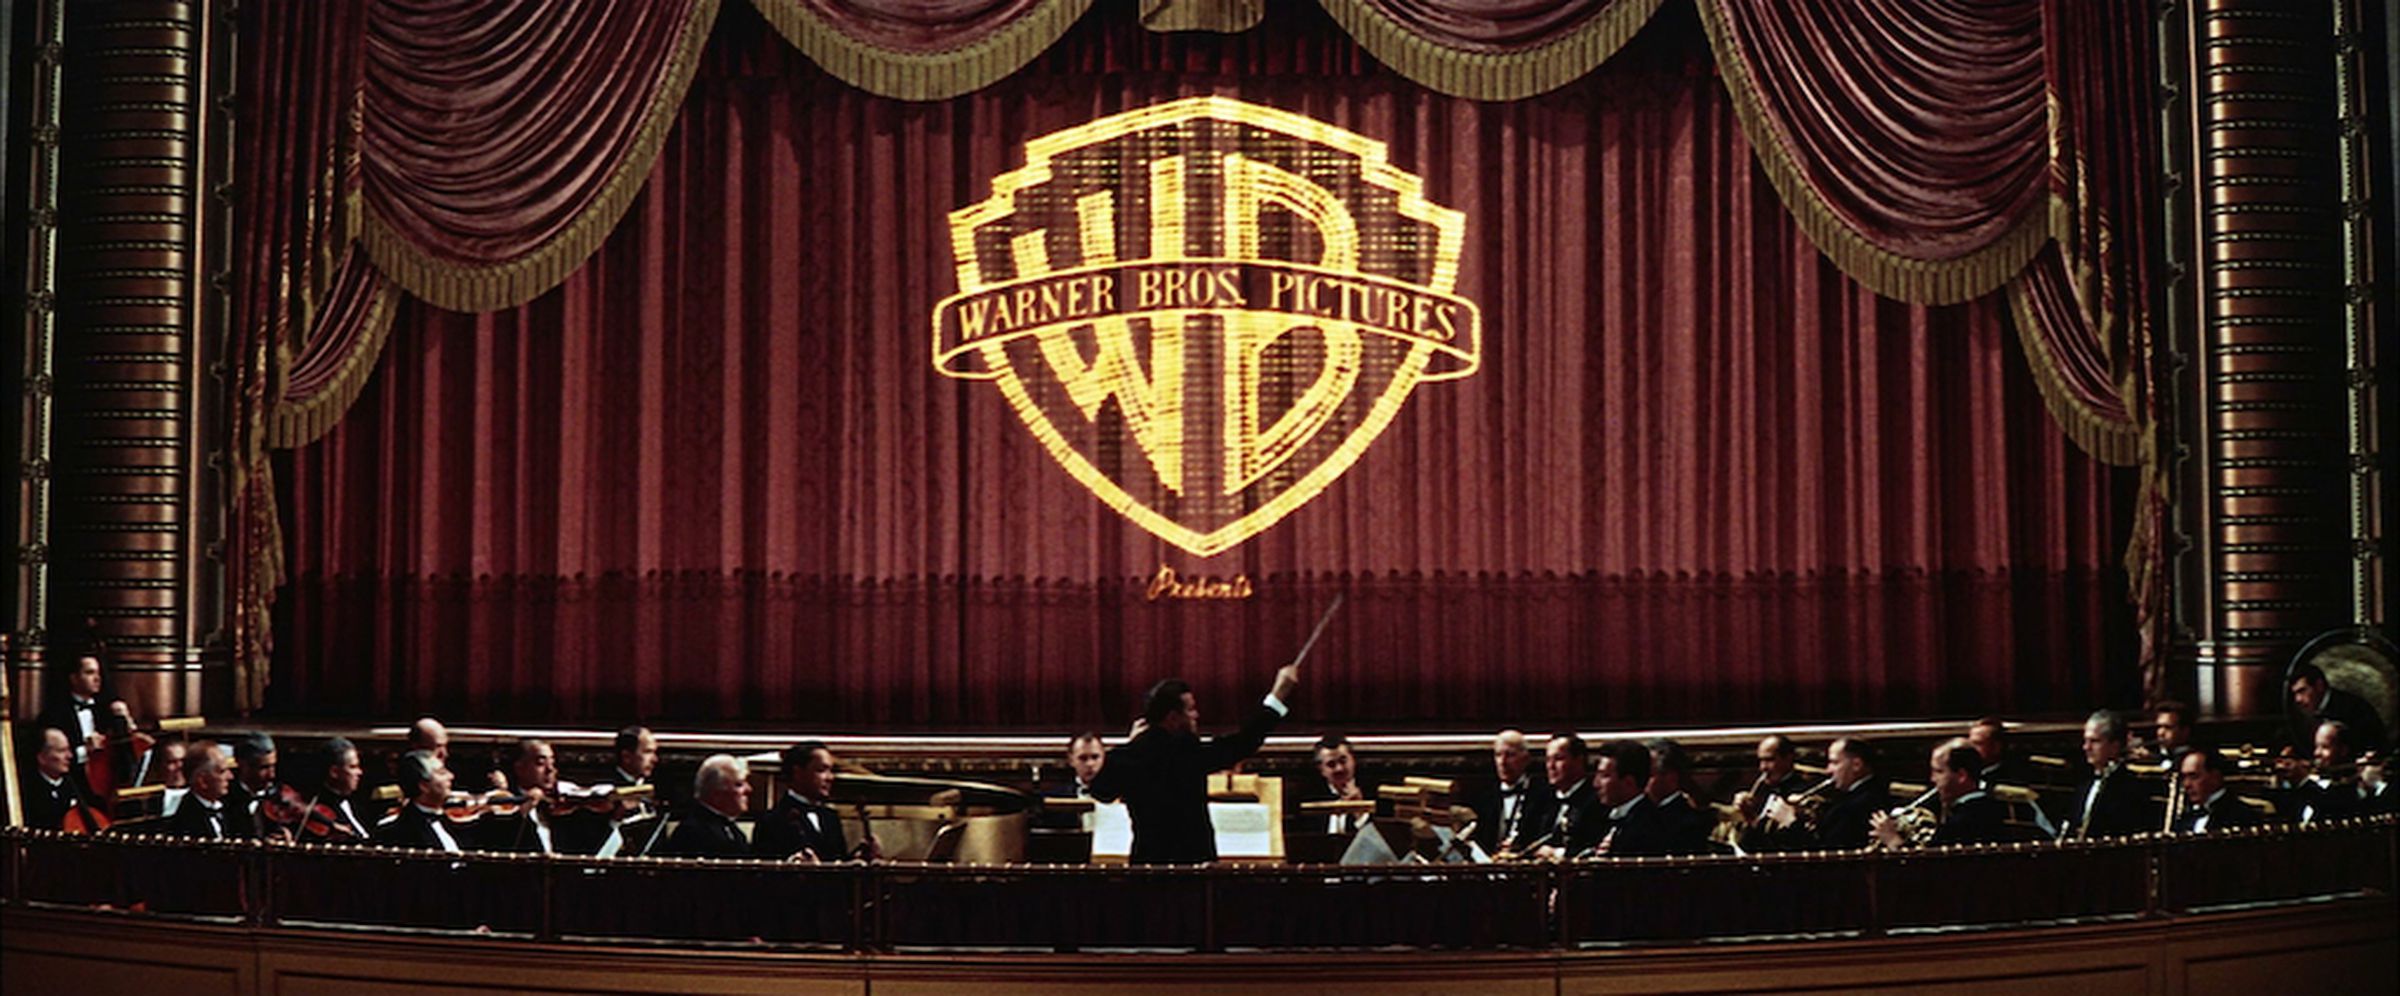 History of the Warner Bros. Pictures logo